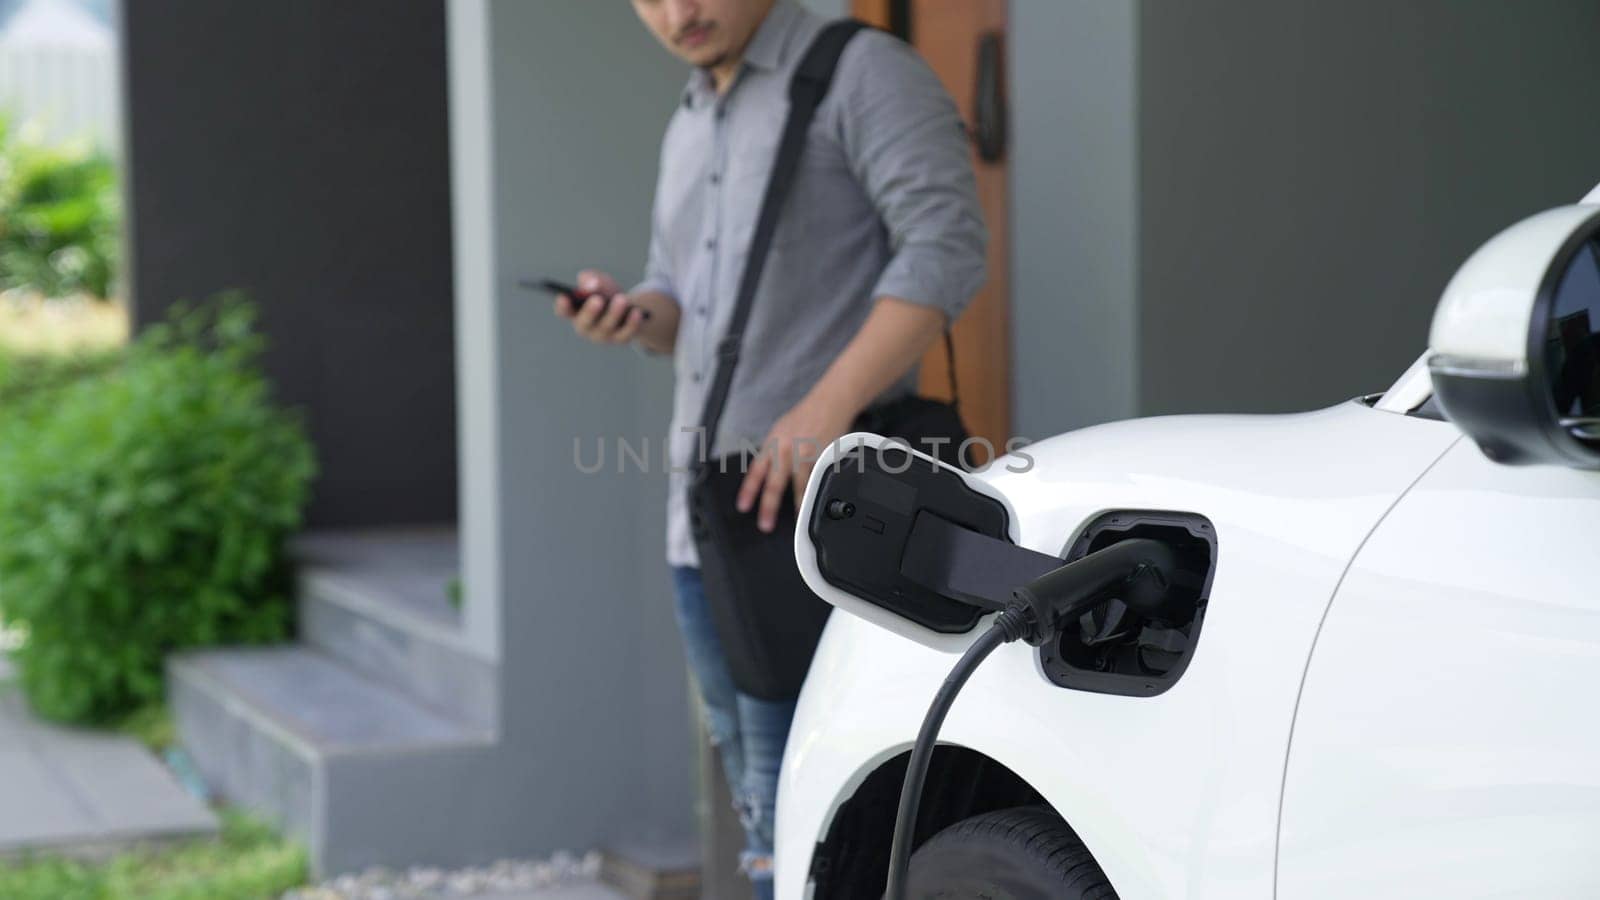 A man unplugs the electric vehicle's charger at his residence. Concept of the use of electric vehicles in a progressive lifestyle contributes to a clean and healthy environment.